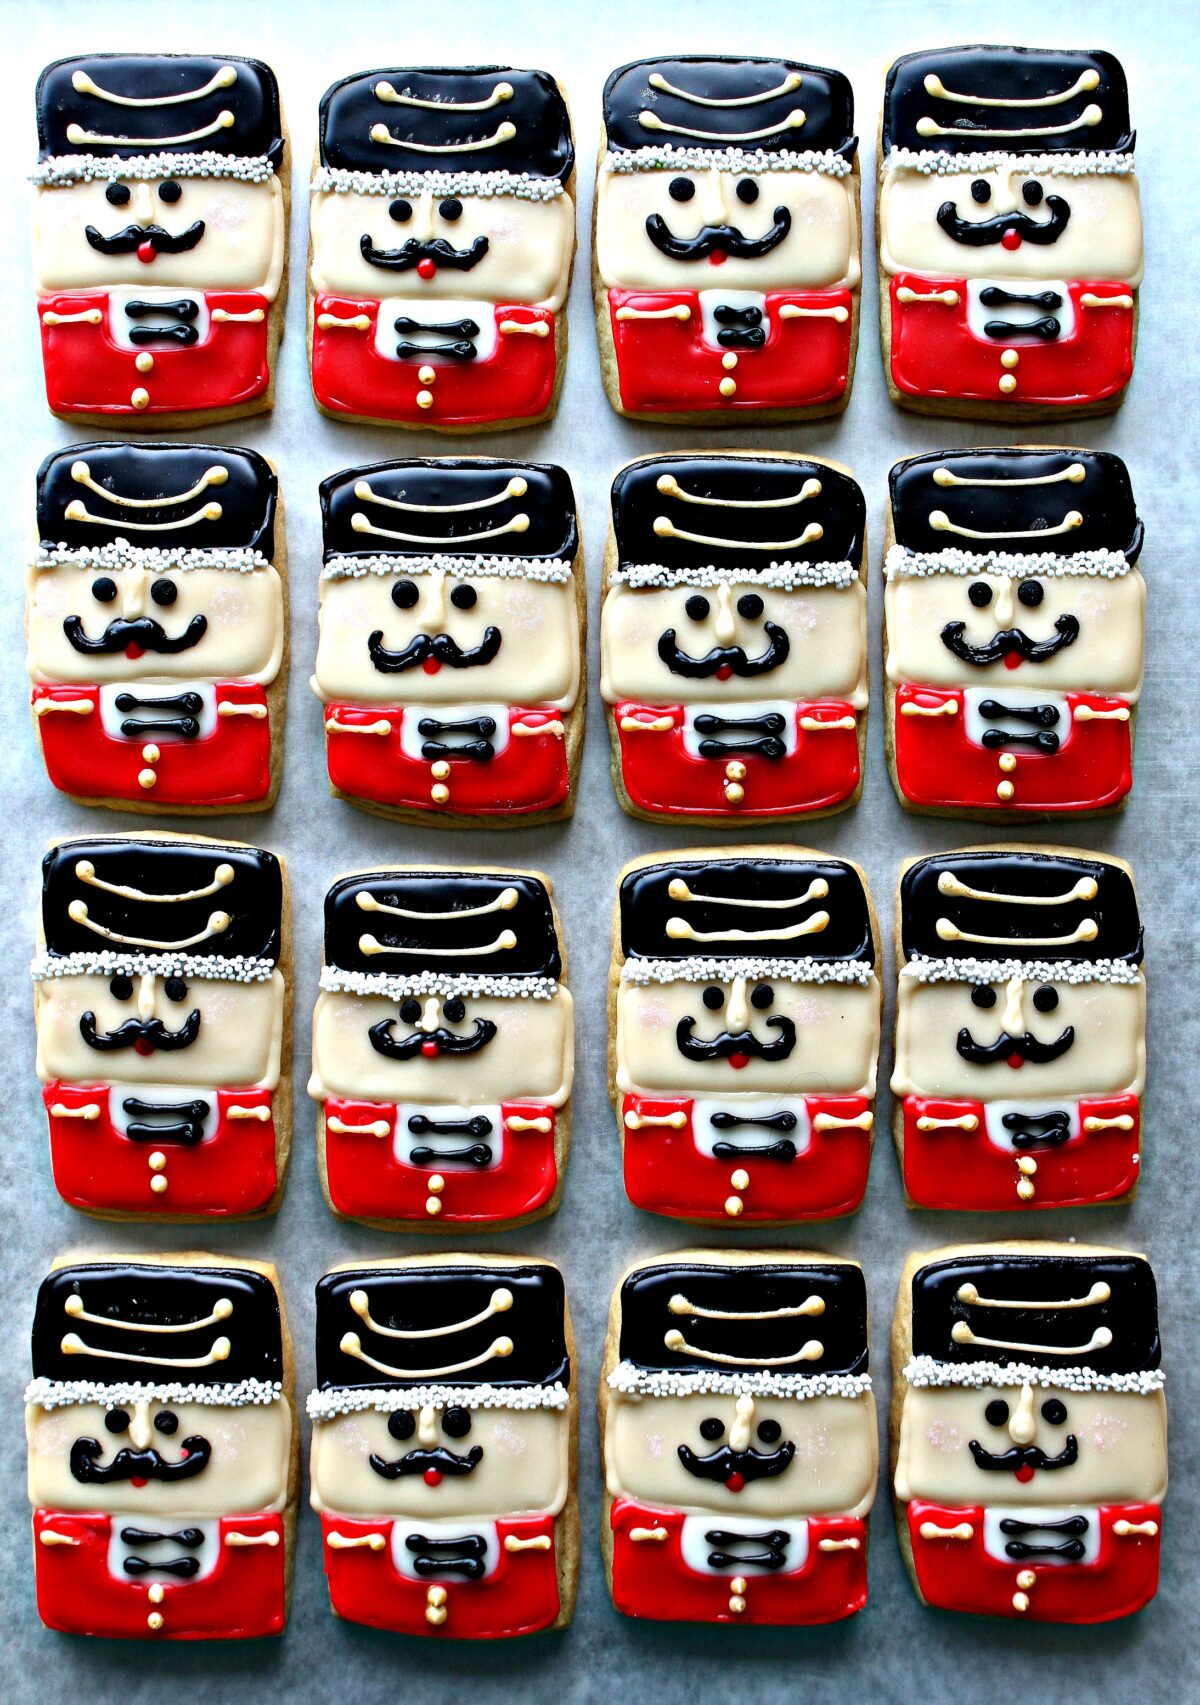 Nutcracker Sugar Cookies decorated in red and black to look like soldiers.